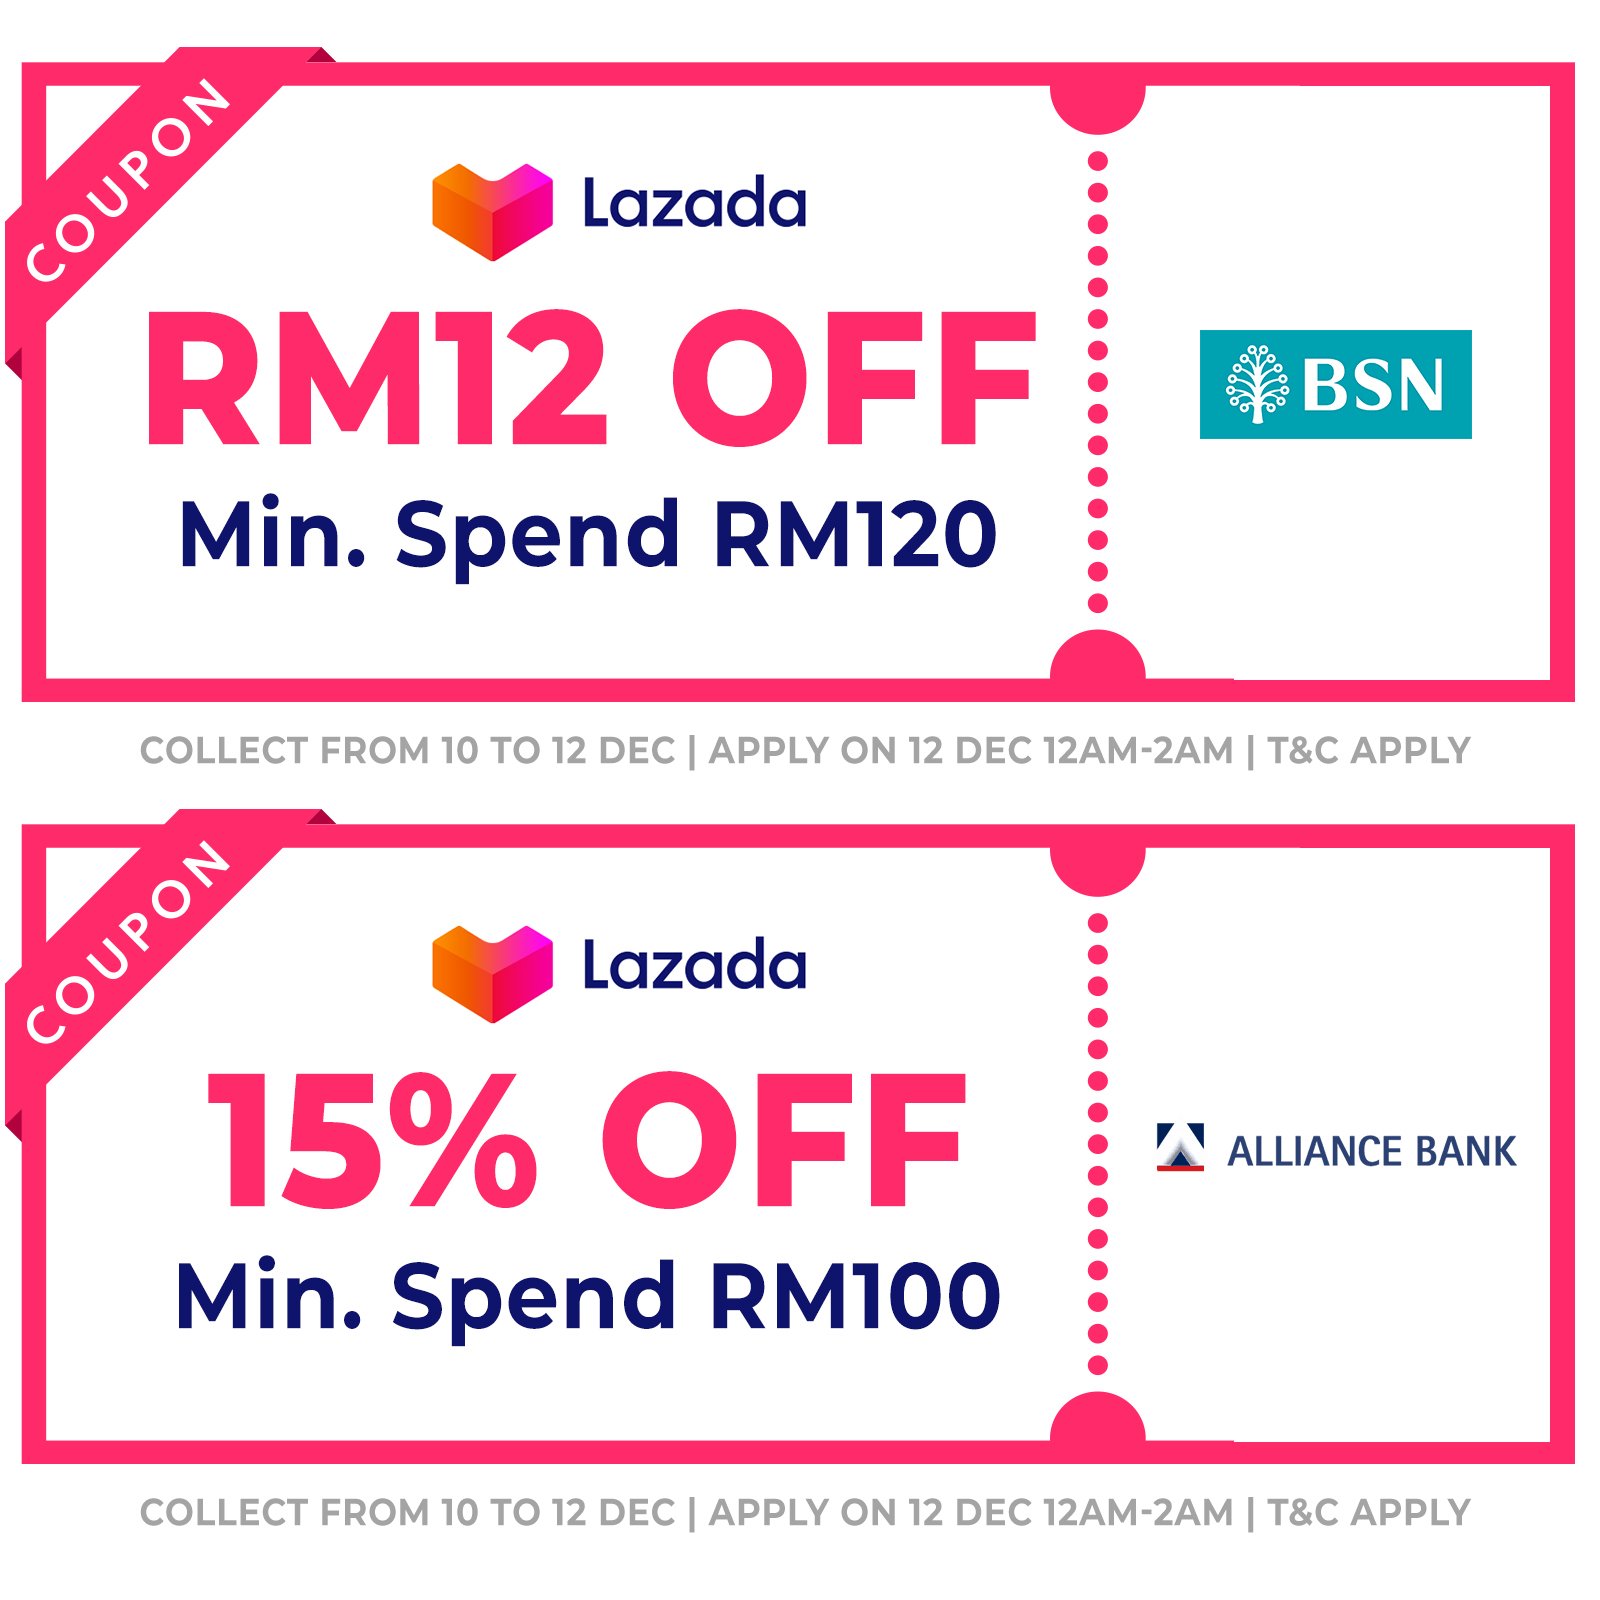 cover-1212-lazada-all-vouchers-bank-code-6